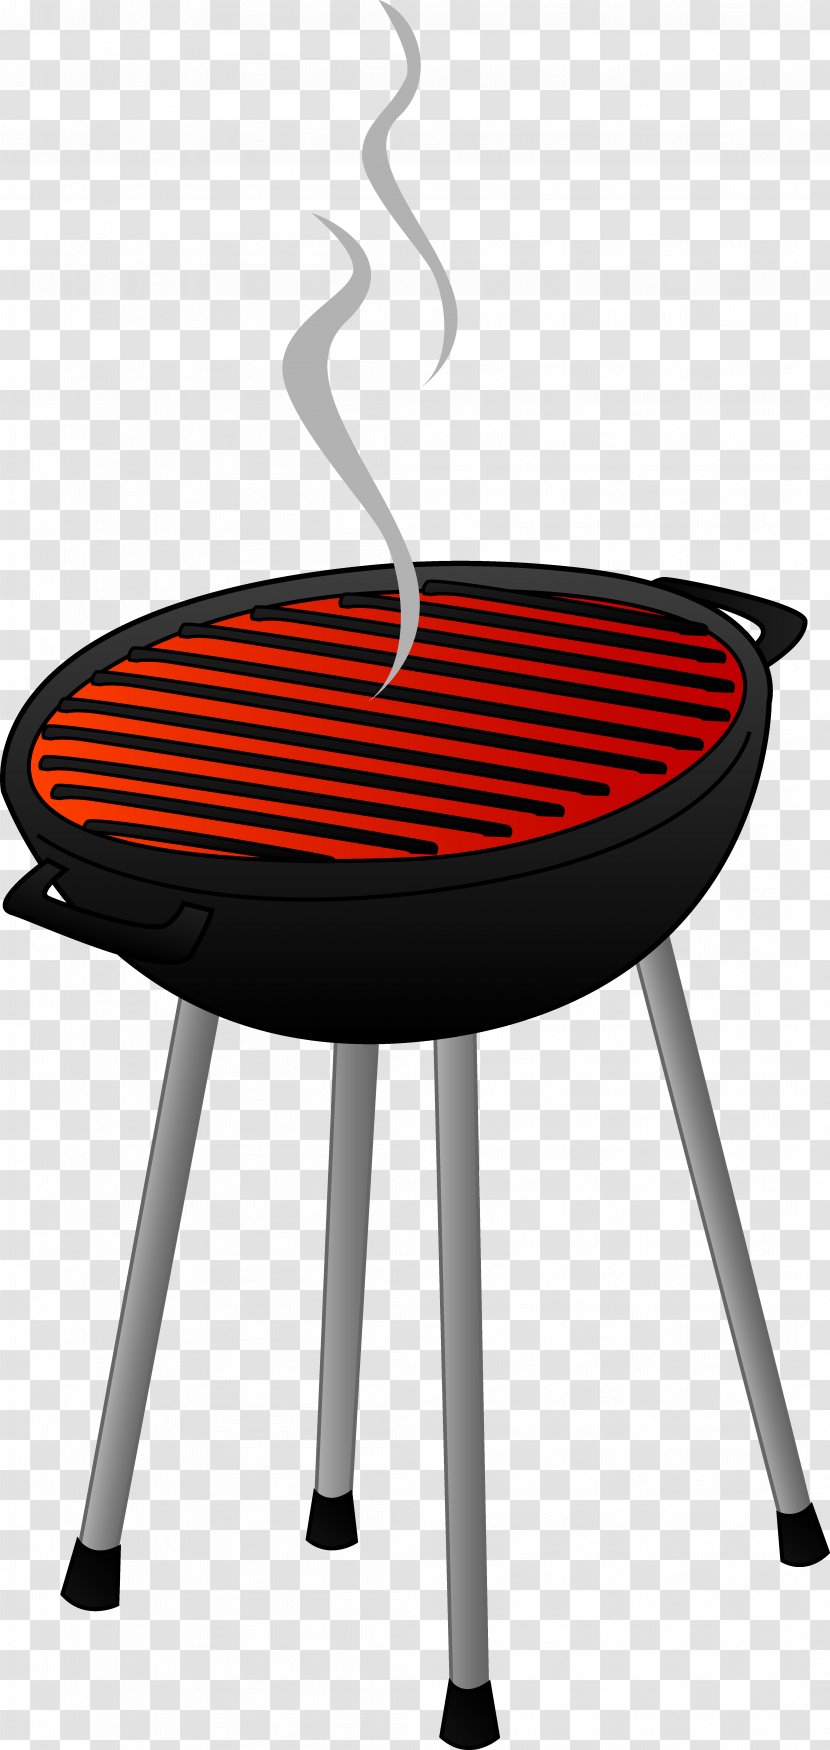 Barbecue Sauce Grilling Clip Art - Barbecuesmoker - BBQ Cliparts Cooking Transparent PNG